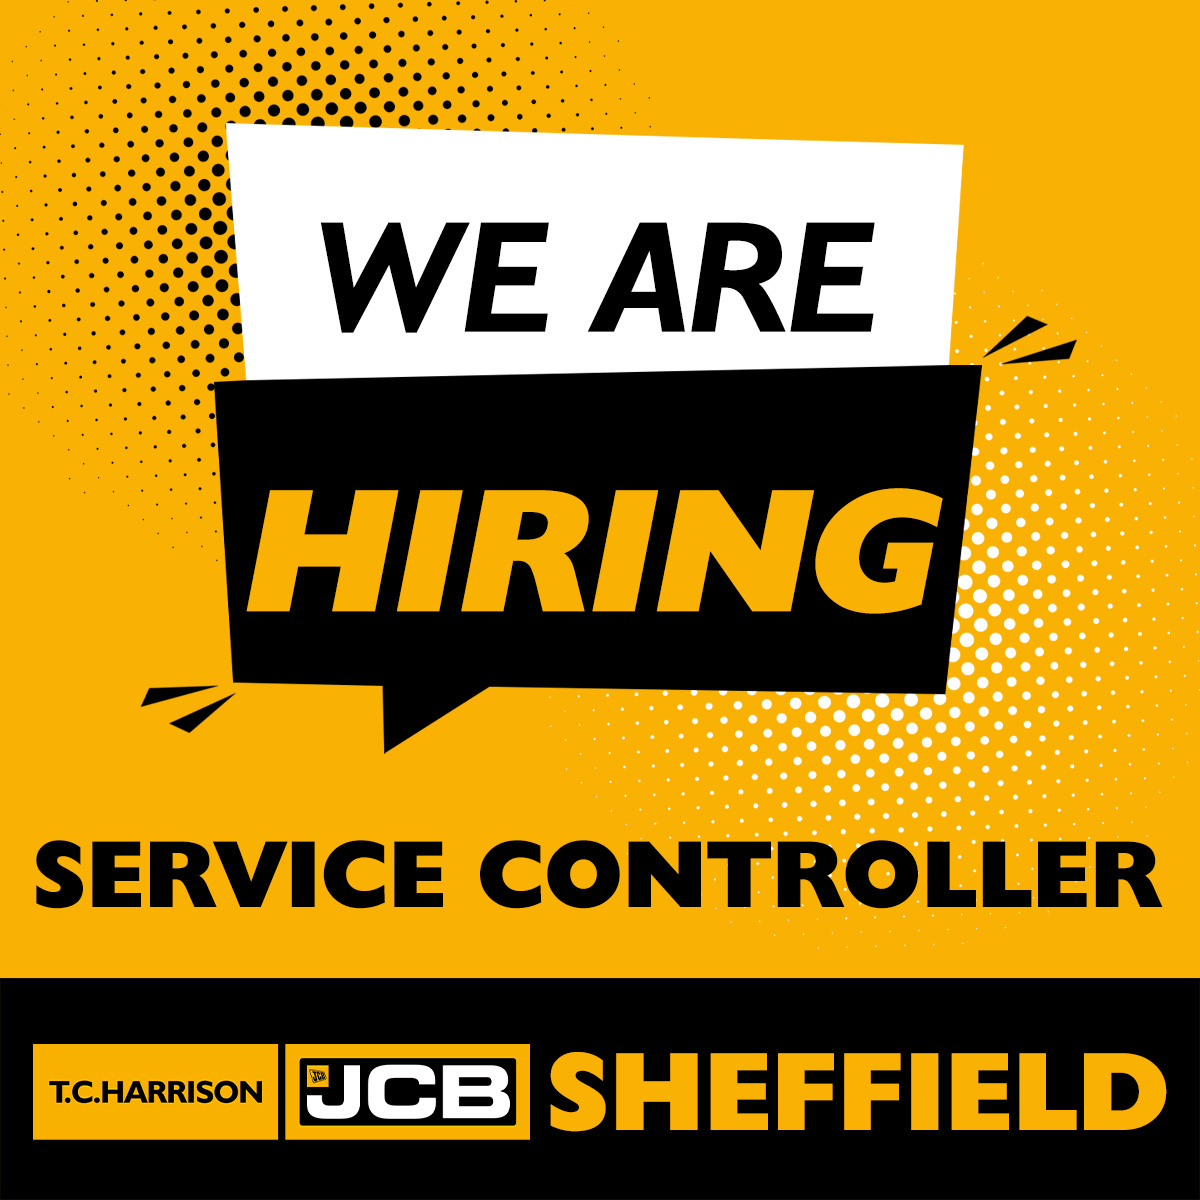 We are hiring! 🤩

We're looking for a service controller to join our team in Sheffield! 👷

Apply today 👉 bit.ly/489z1bc

#SheffieldJobs #Hiring #JobVacancy